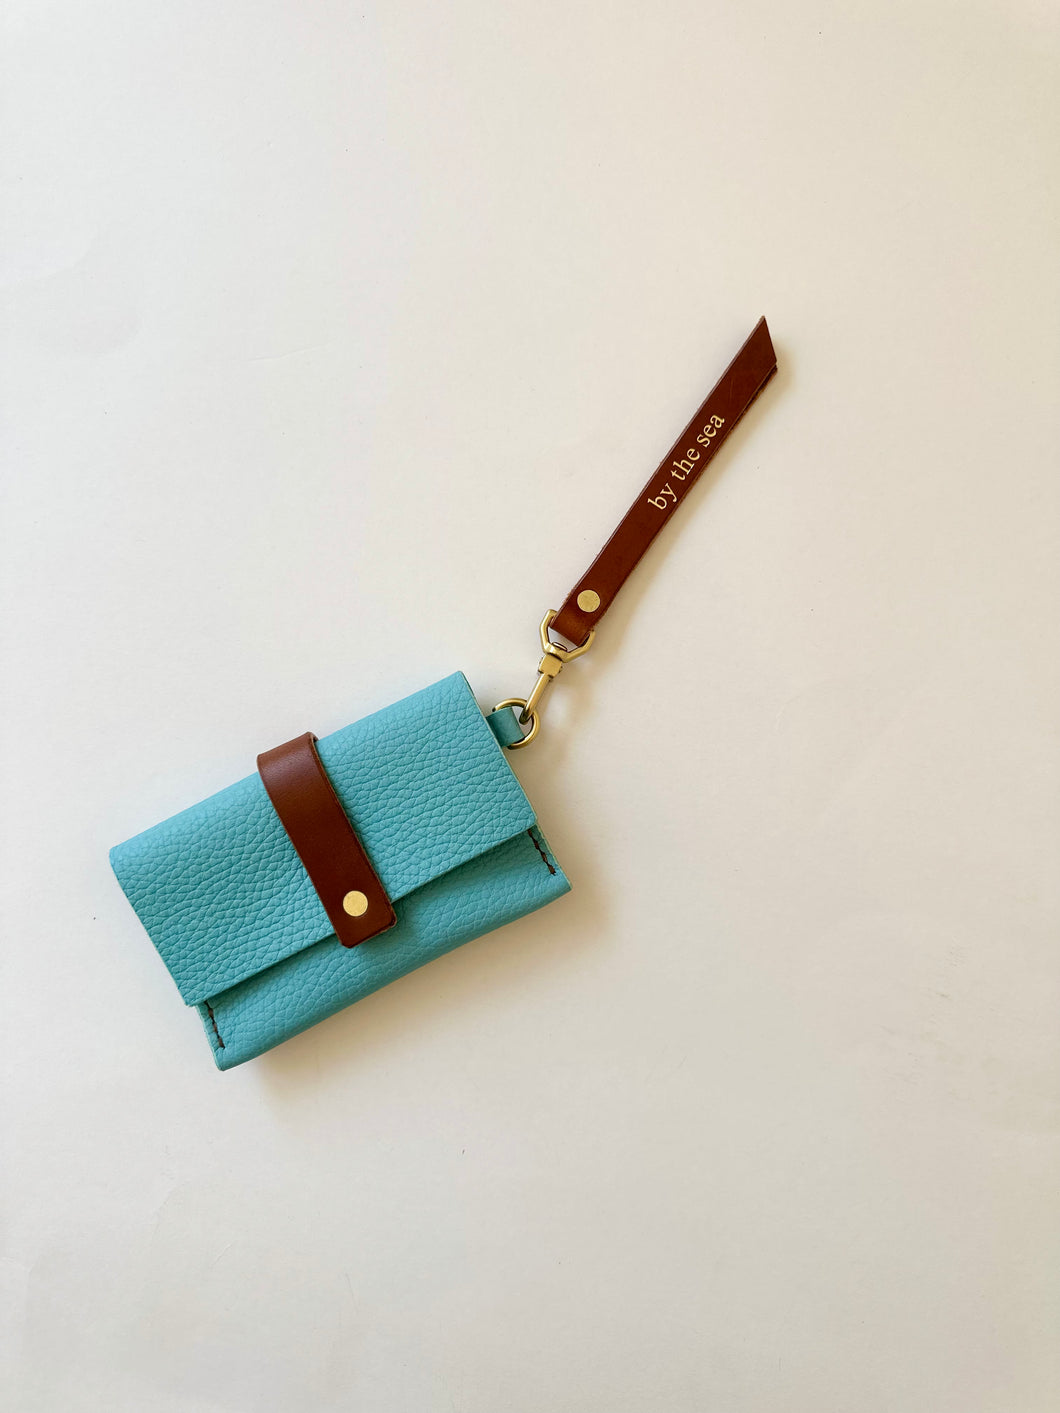 Card Wallet in Poolside Blue Vegetable Tanned Leather with Cognac Strap